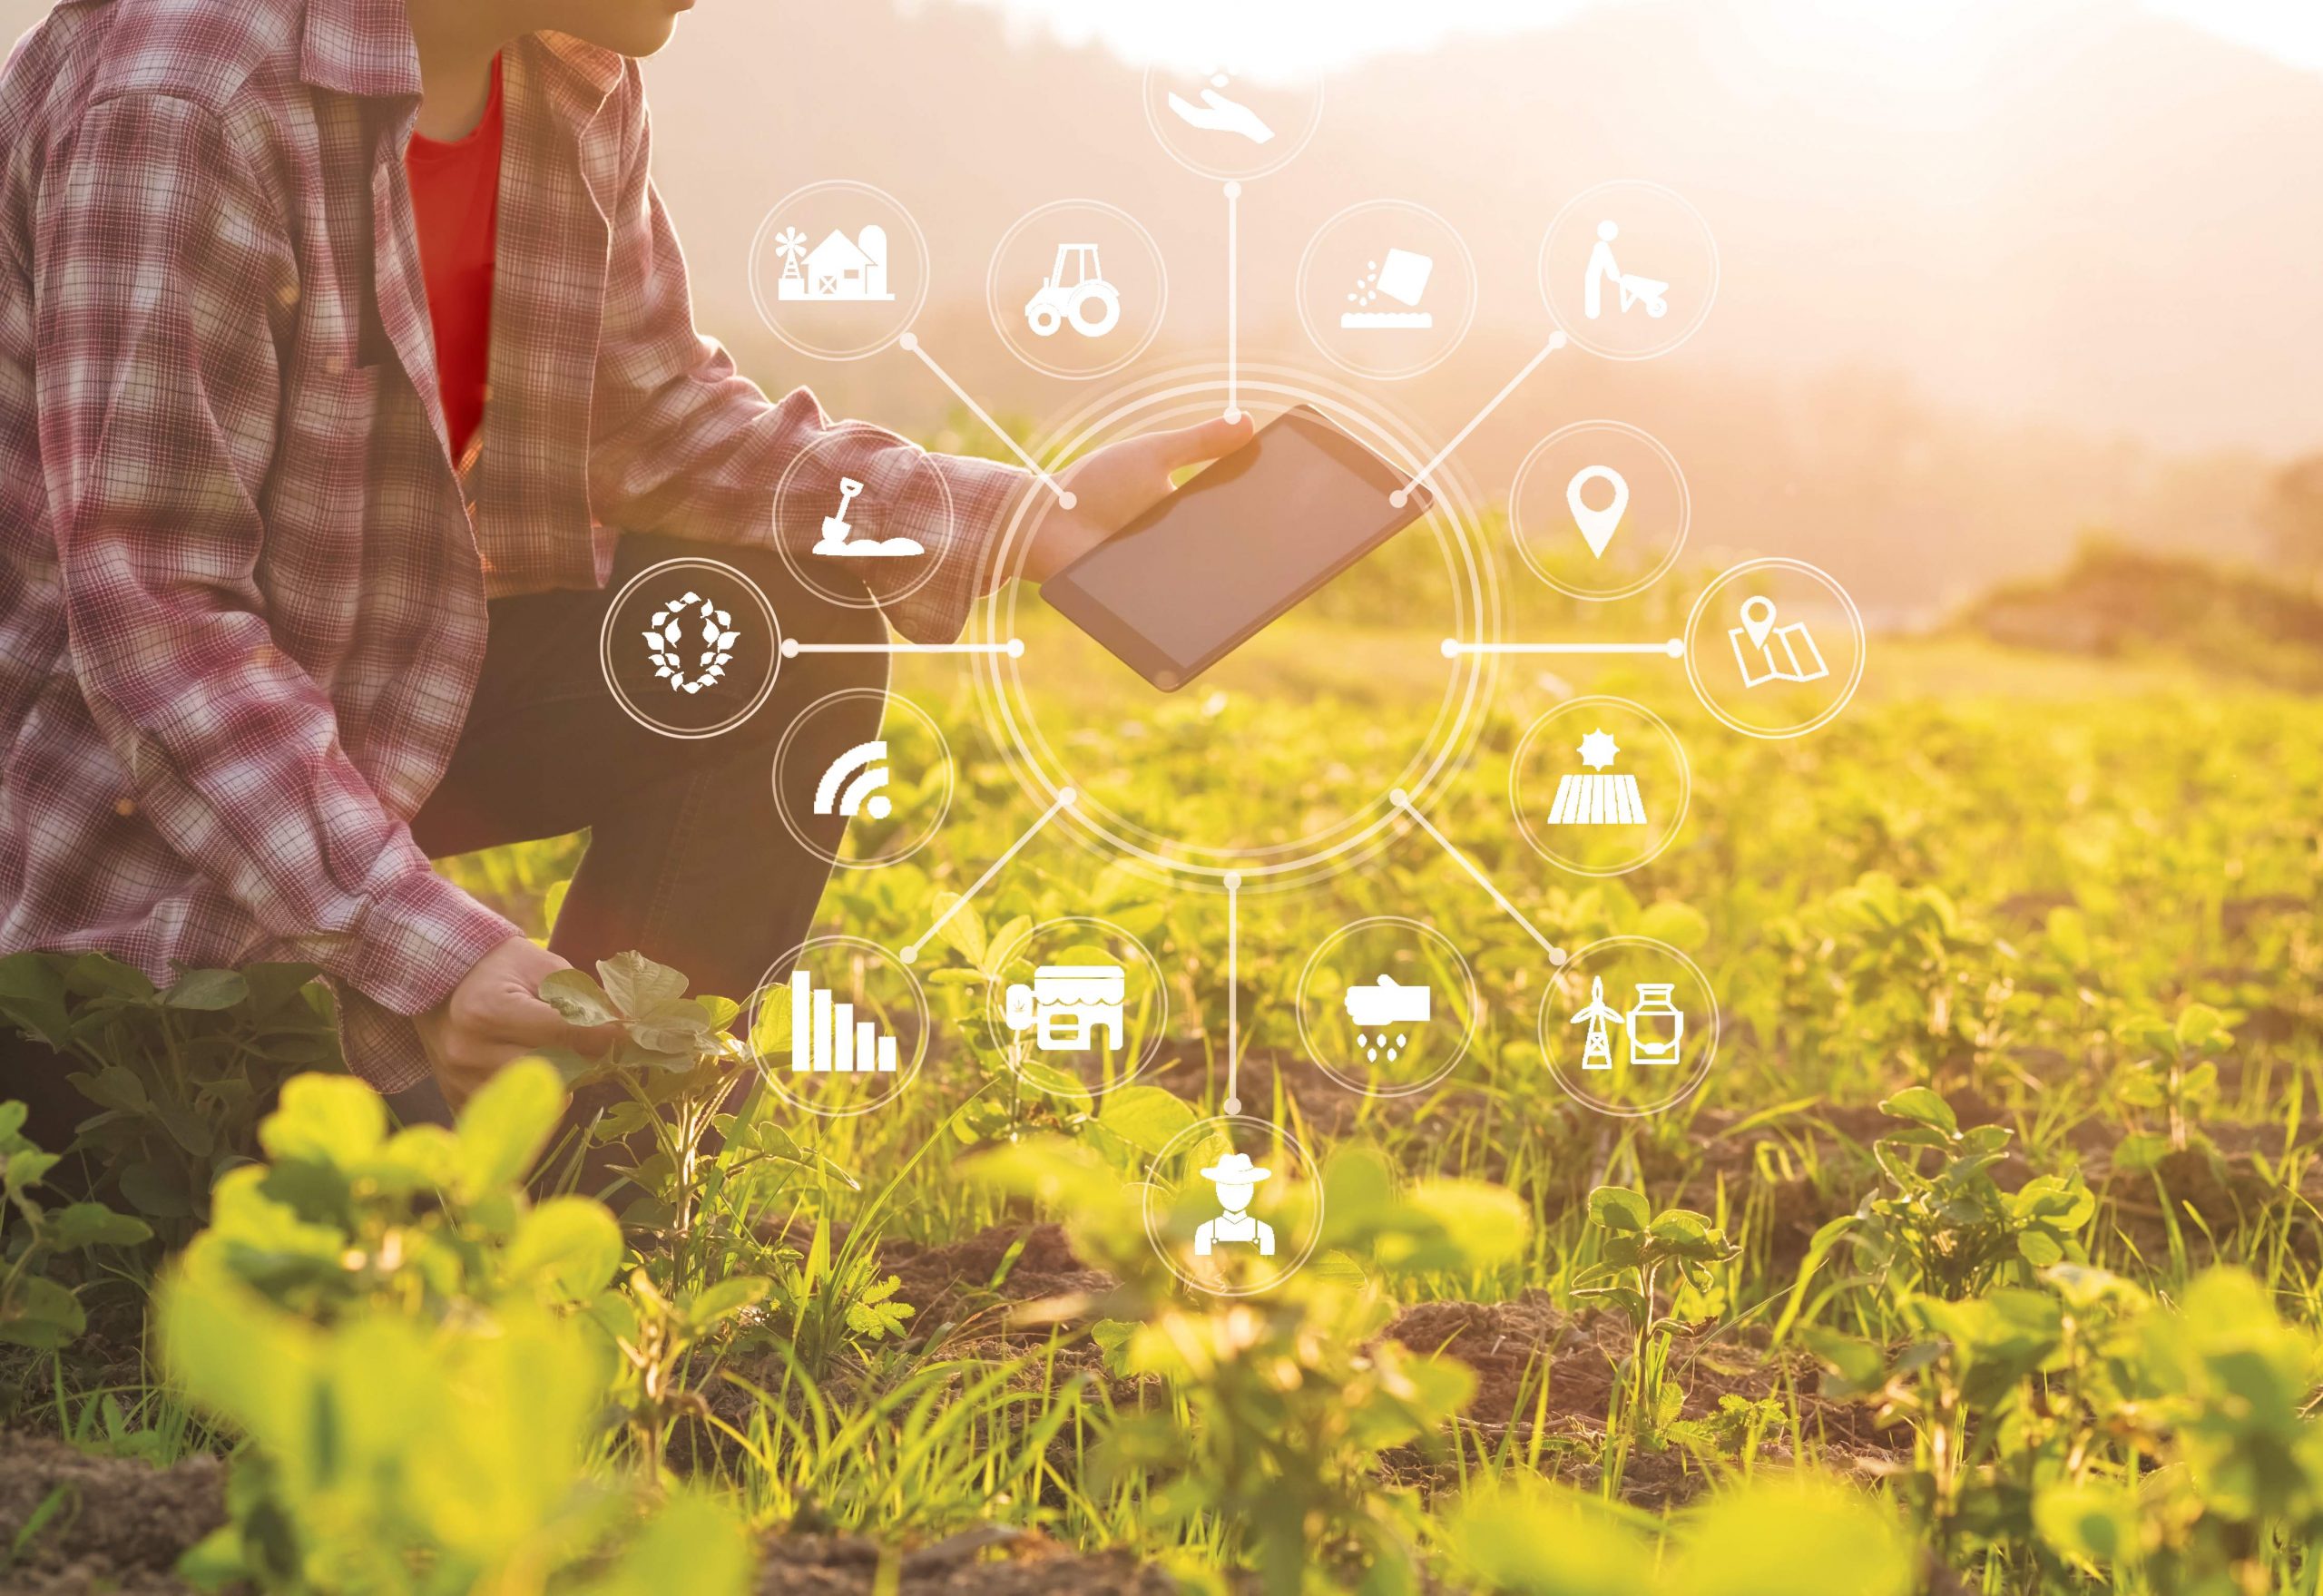 IoT Applications in Agriculture